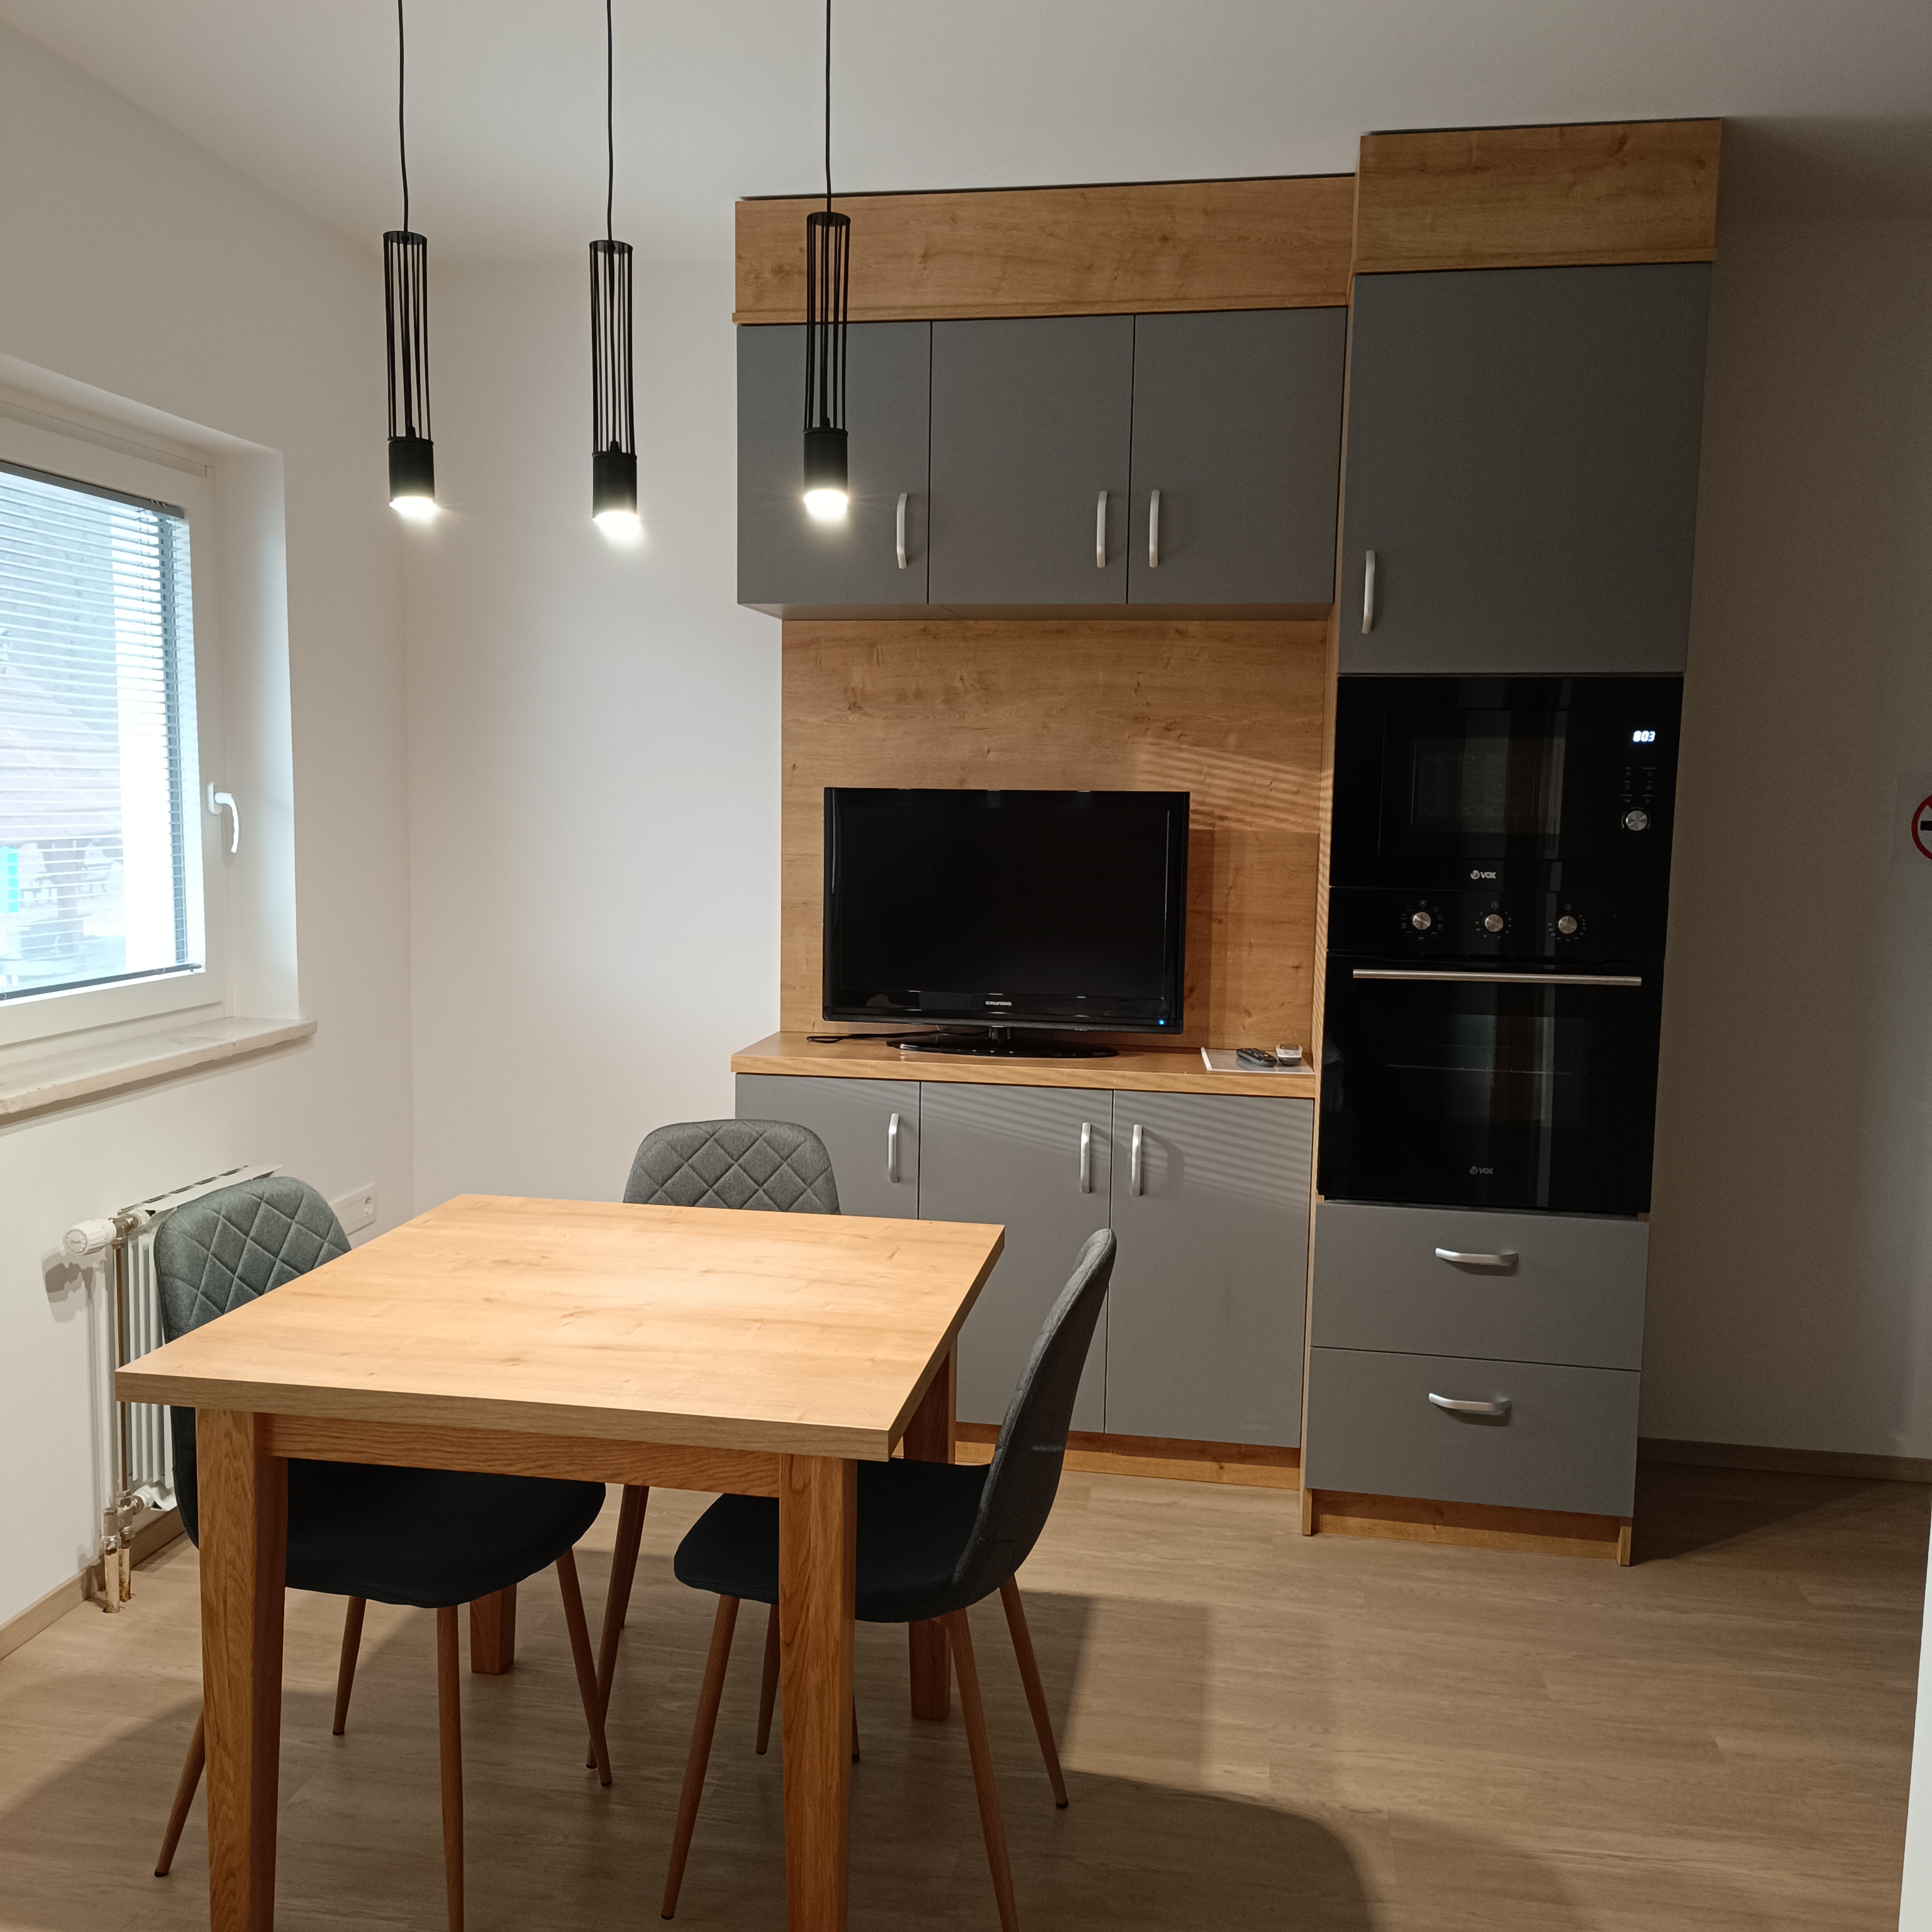 Room with kitchen 13